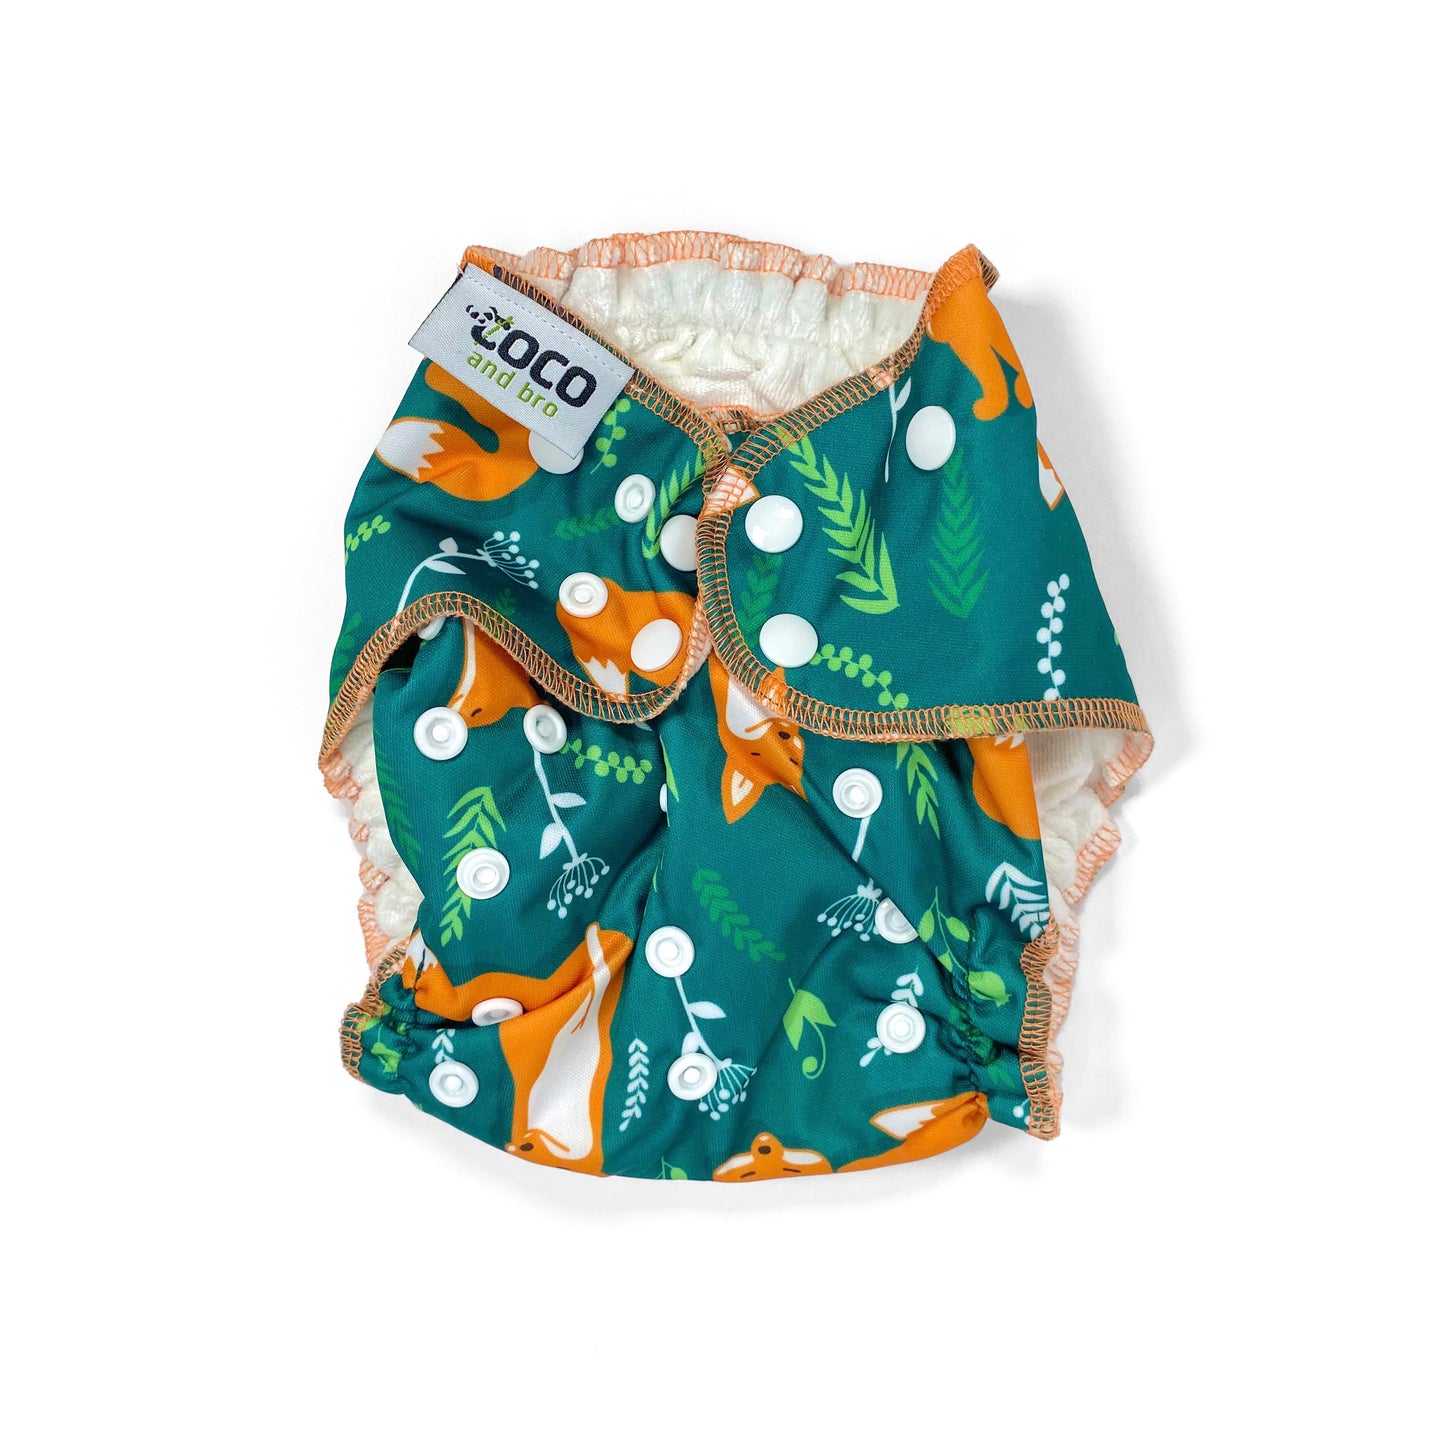 An adjustable reusable nappy for babies and toddlers, featuring a green fox design, with images of foxes on a green background. View shows the front of the nappy, with fastenings closed.